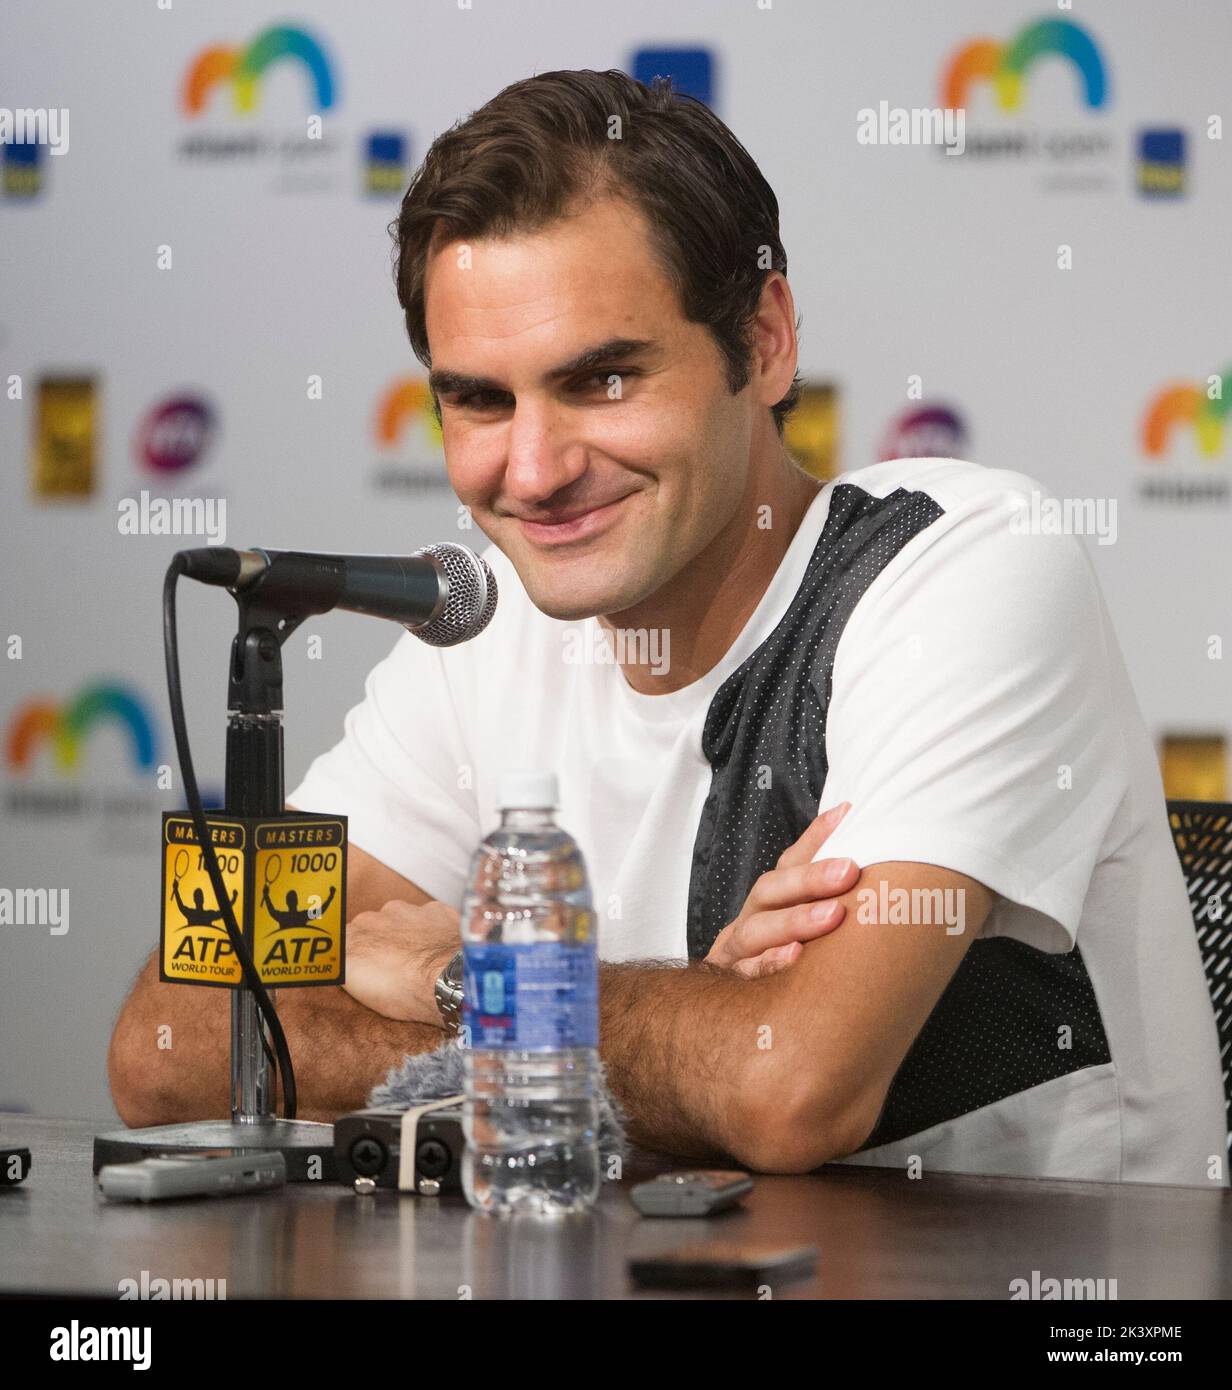 KEY BISCAYNE, FL - MARCH 24: Roger Federer of Switzerland fields questions from the media during the Miami Open presented by Itau at Crandon Park Tennis Center on March 24, 2016 in Key Biscayne, Florida. People: Roger Federer Credit: Storms Media Group/Alamy Live News Stock Photo